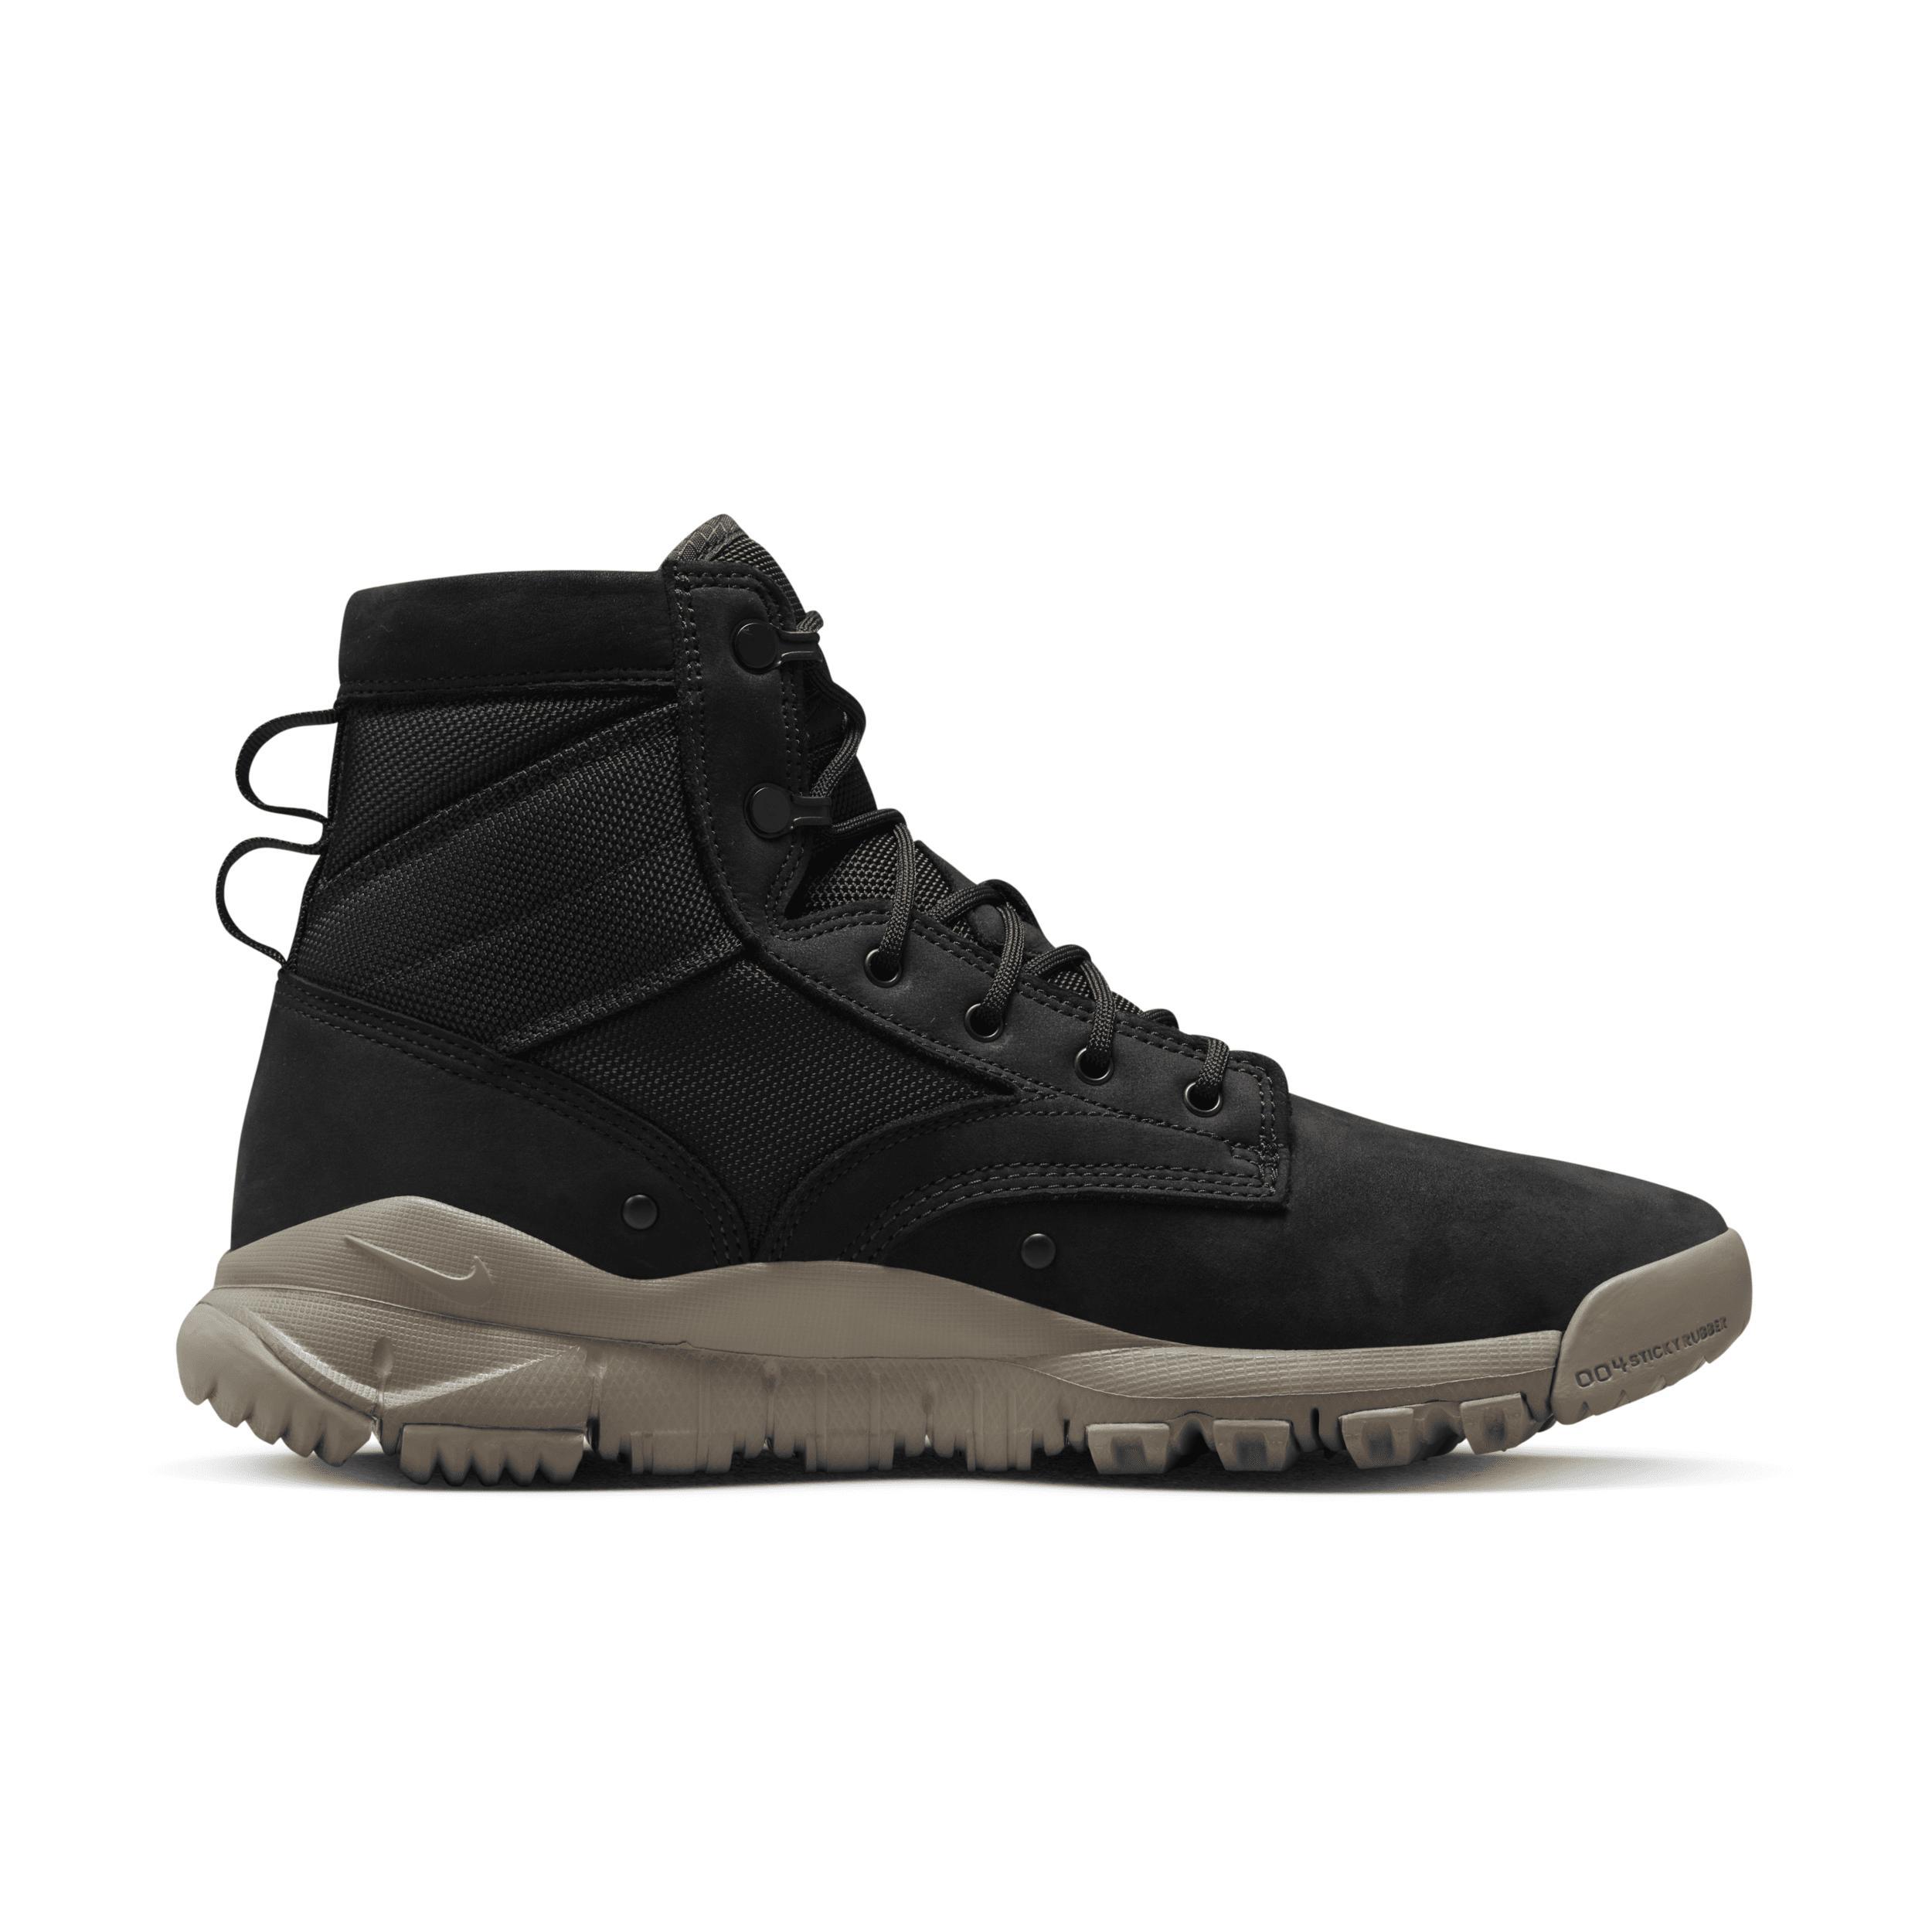 Nike Men's SFB 6" Leather Boots Product Image